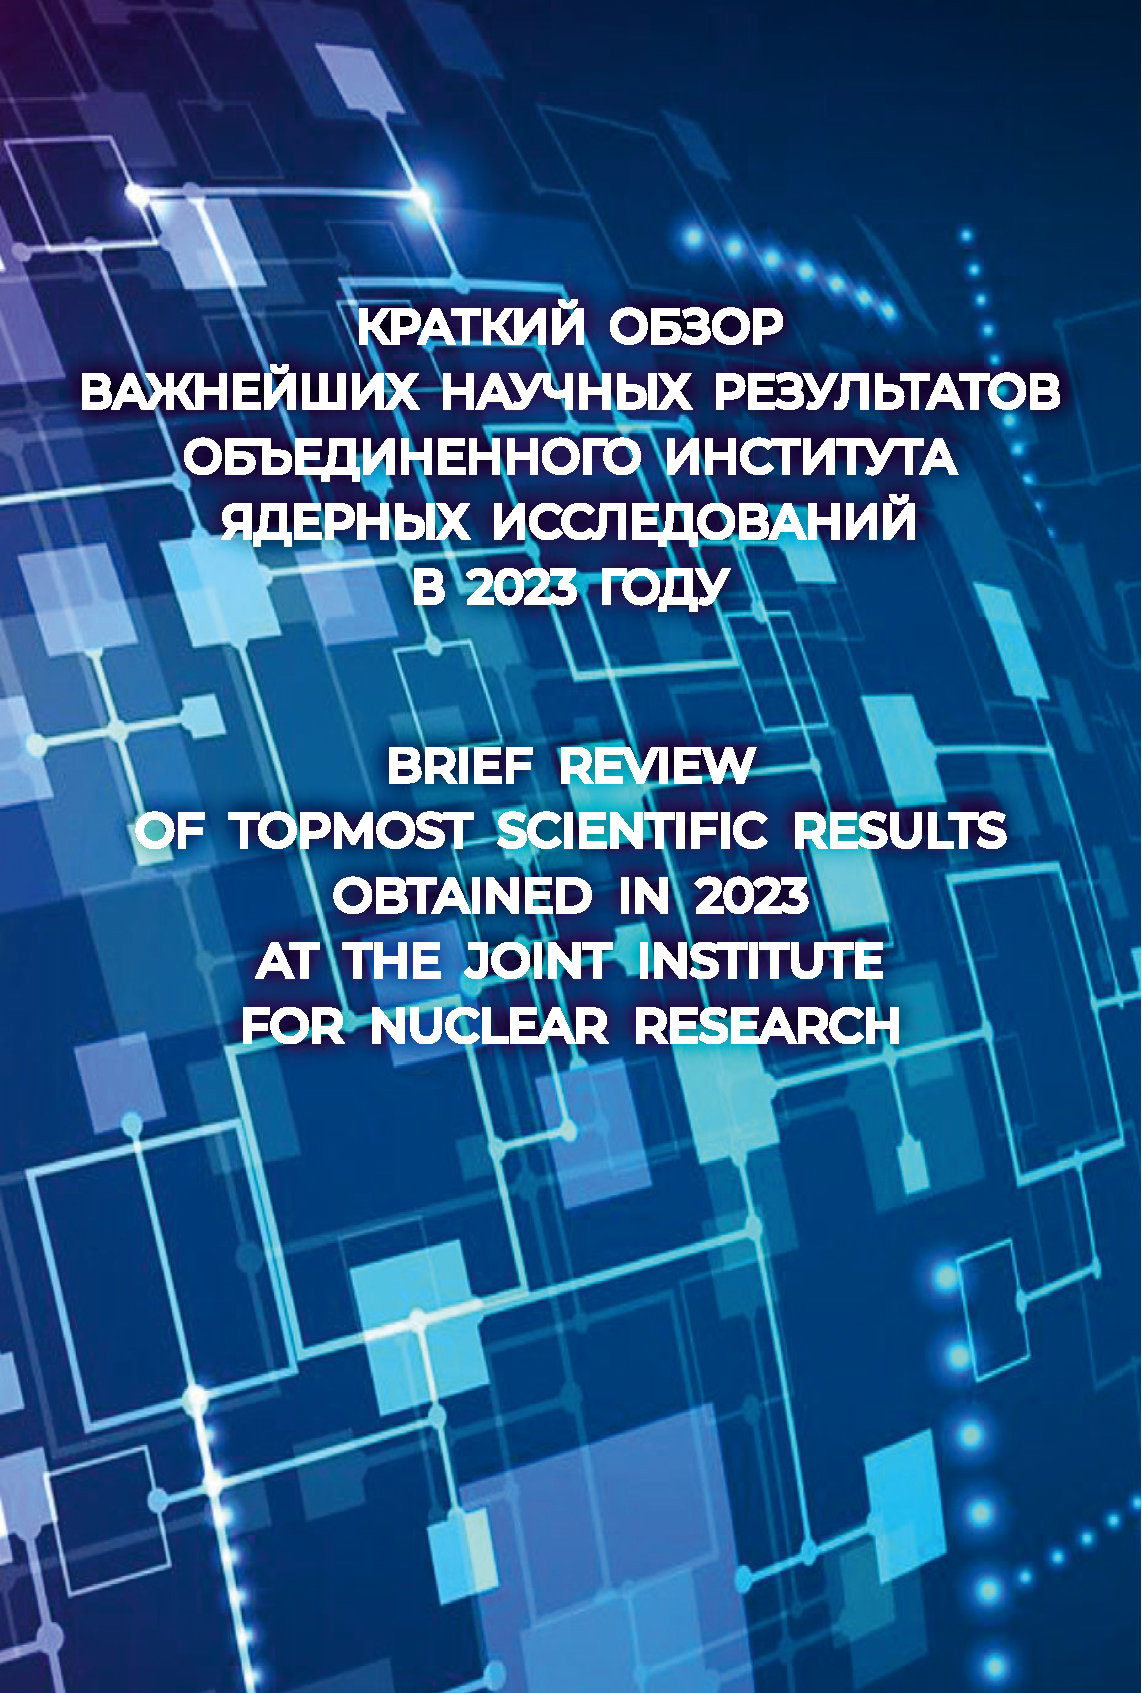 Brief review of topmost scientific results obtained in 2023 at the Joint Institute for Nuclear Research 